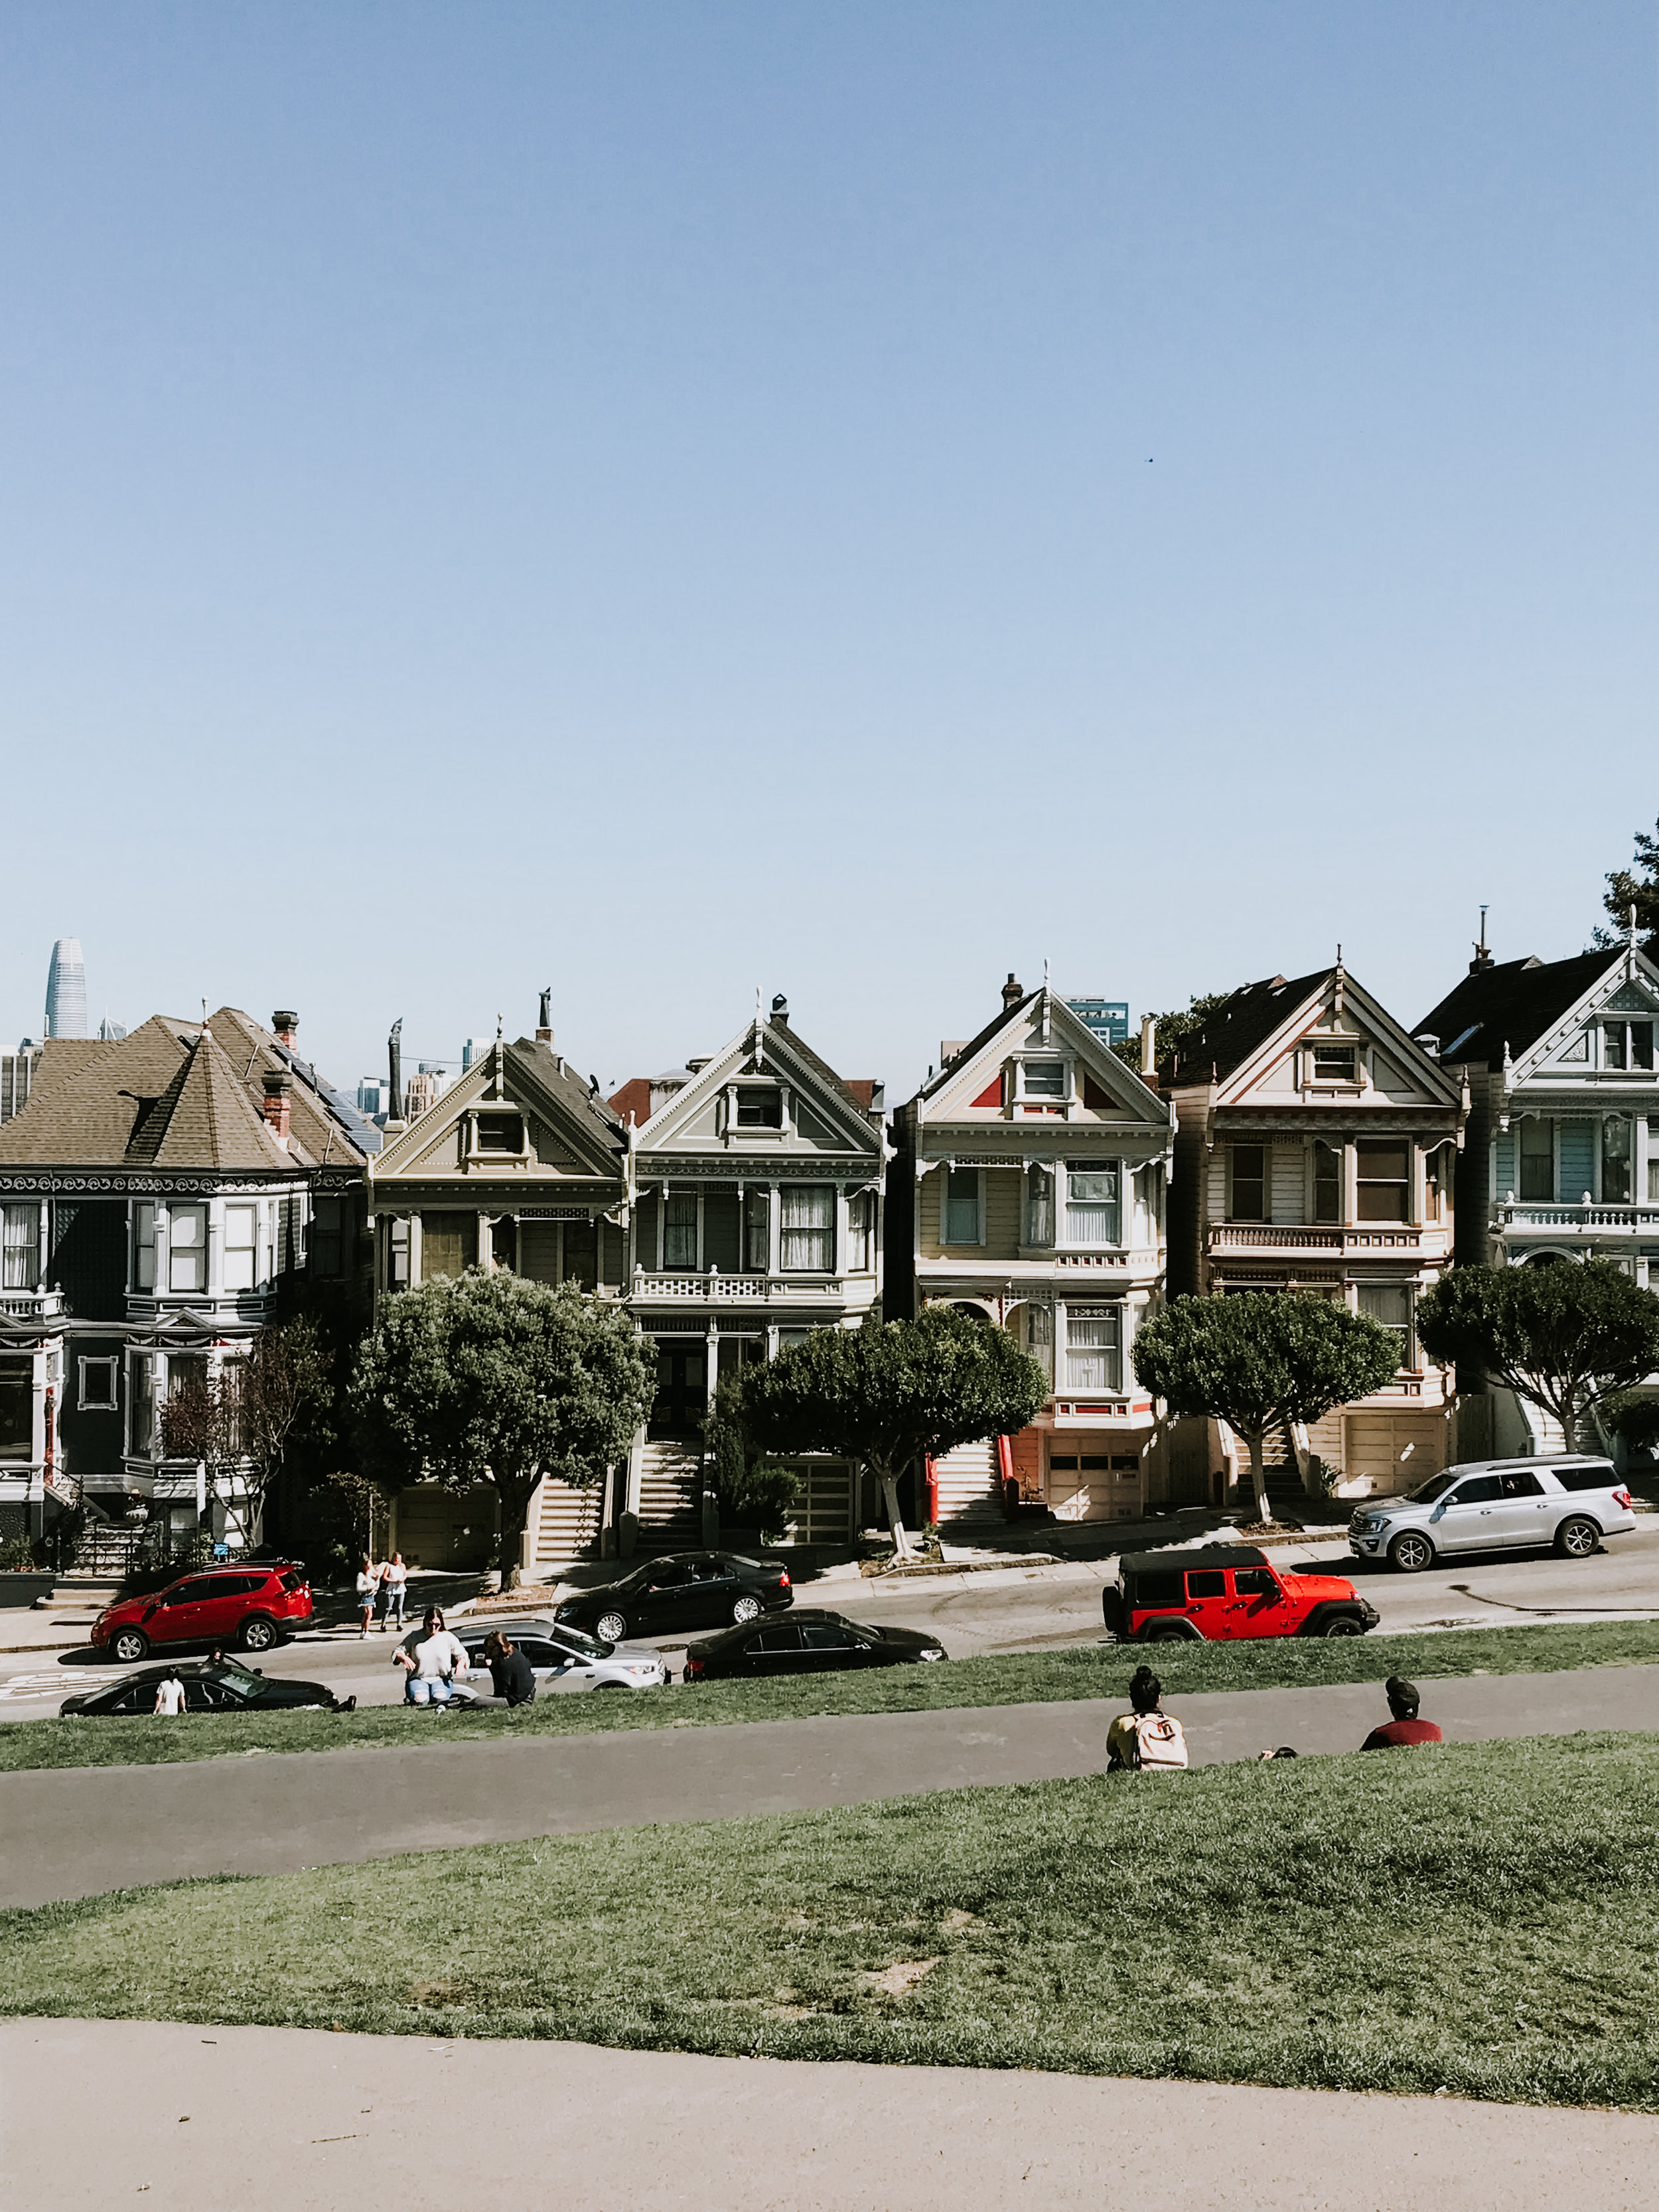 Our trip to San Francisco - the painted ladies